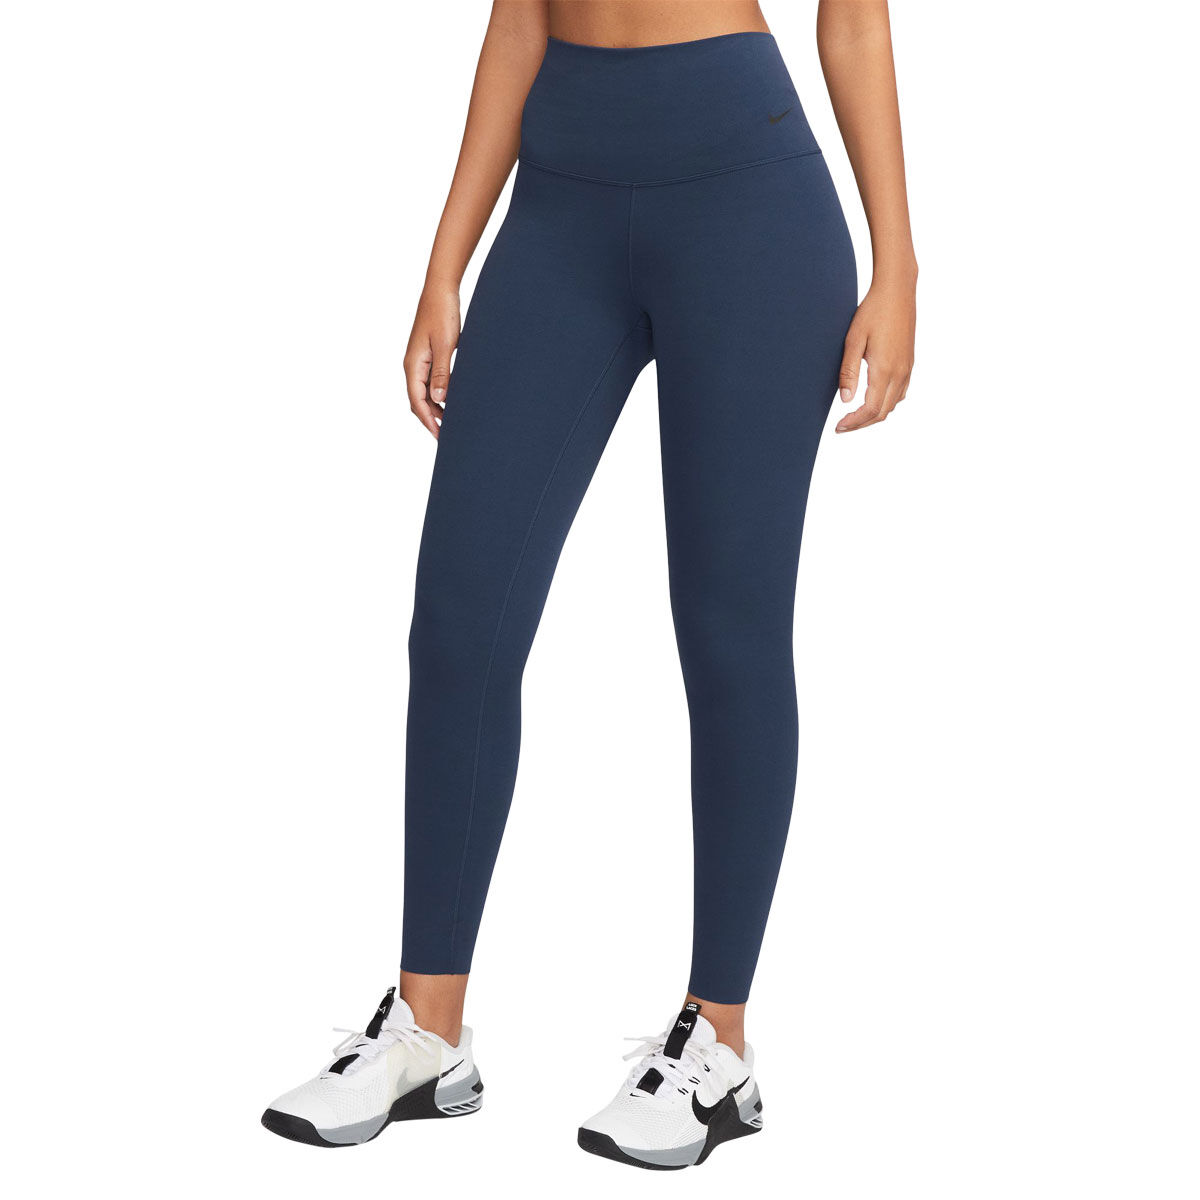 Zenvy Gentle Support High-Waisted 7/8 Leggings, Tights